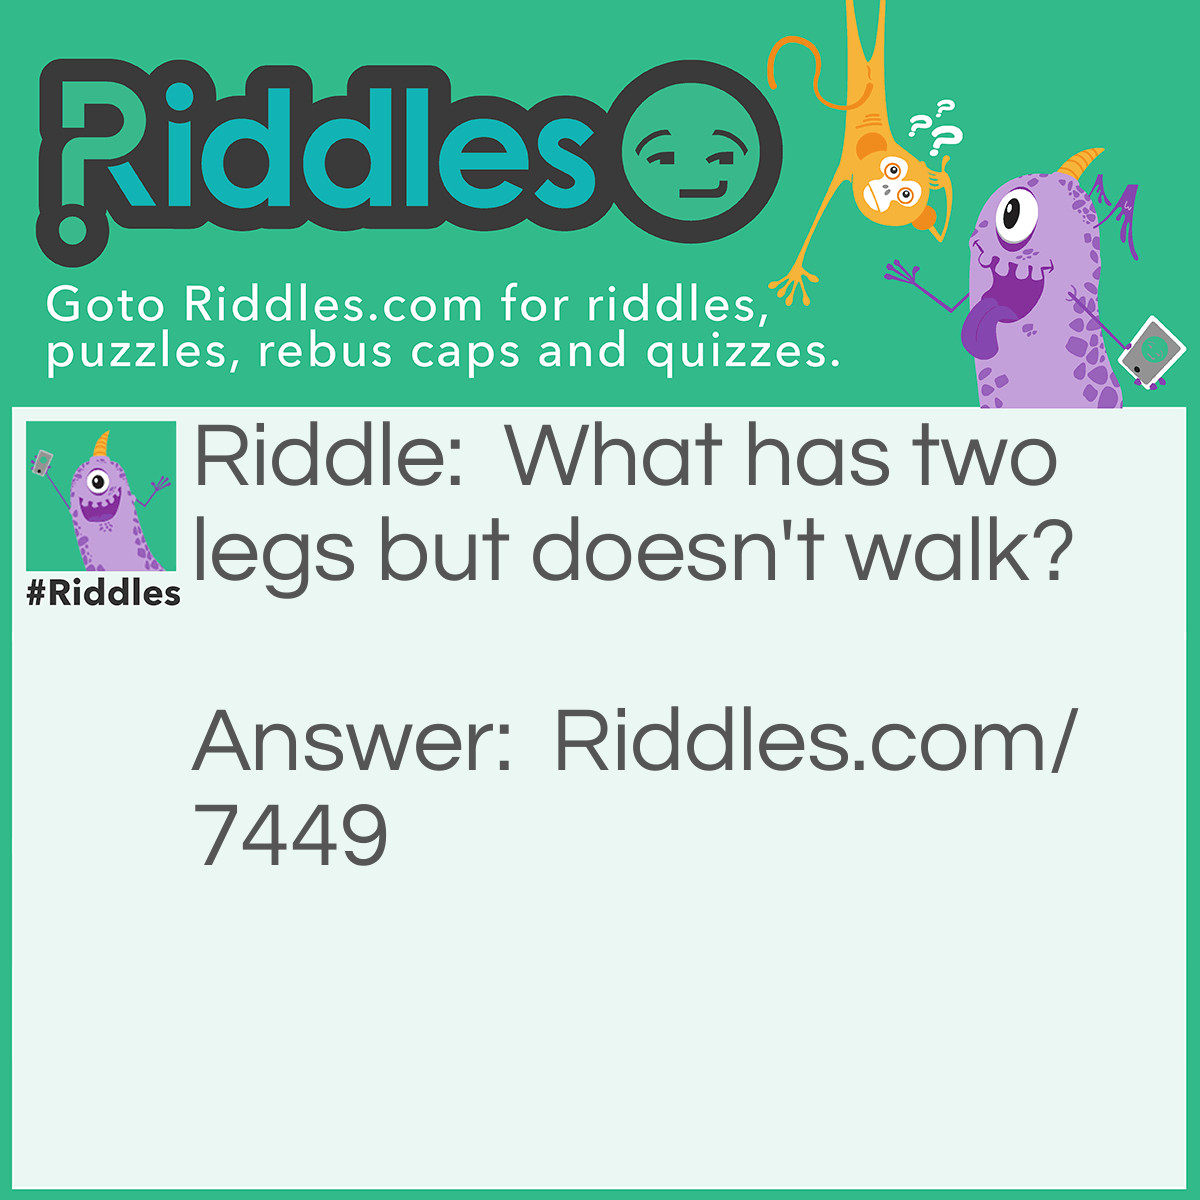 Riddle: What has two legs but doesn't walk? Answer: A ladder.